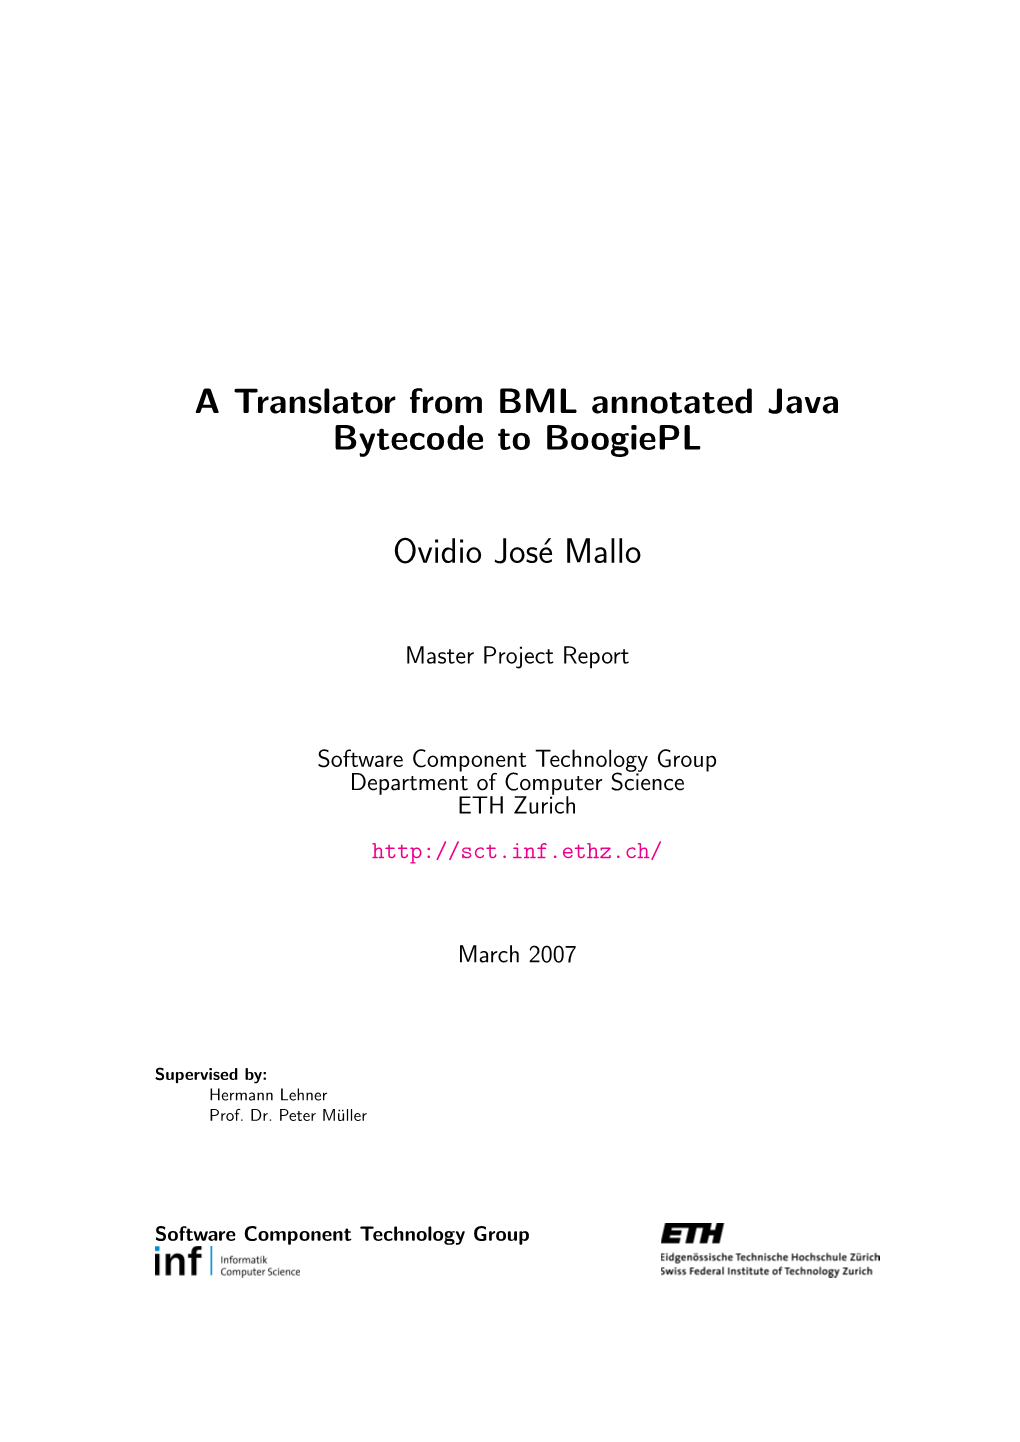 A Translator from BML Annotated Java Bytecode to Boogiepl